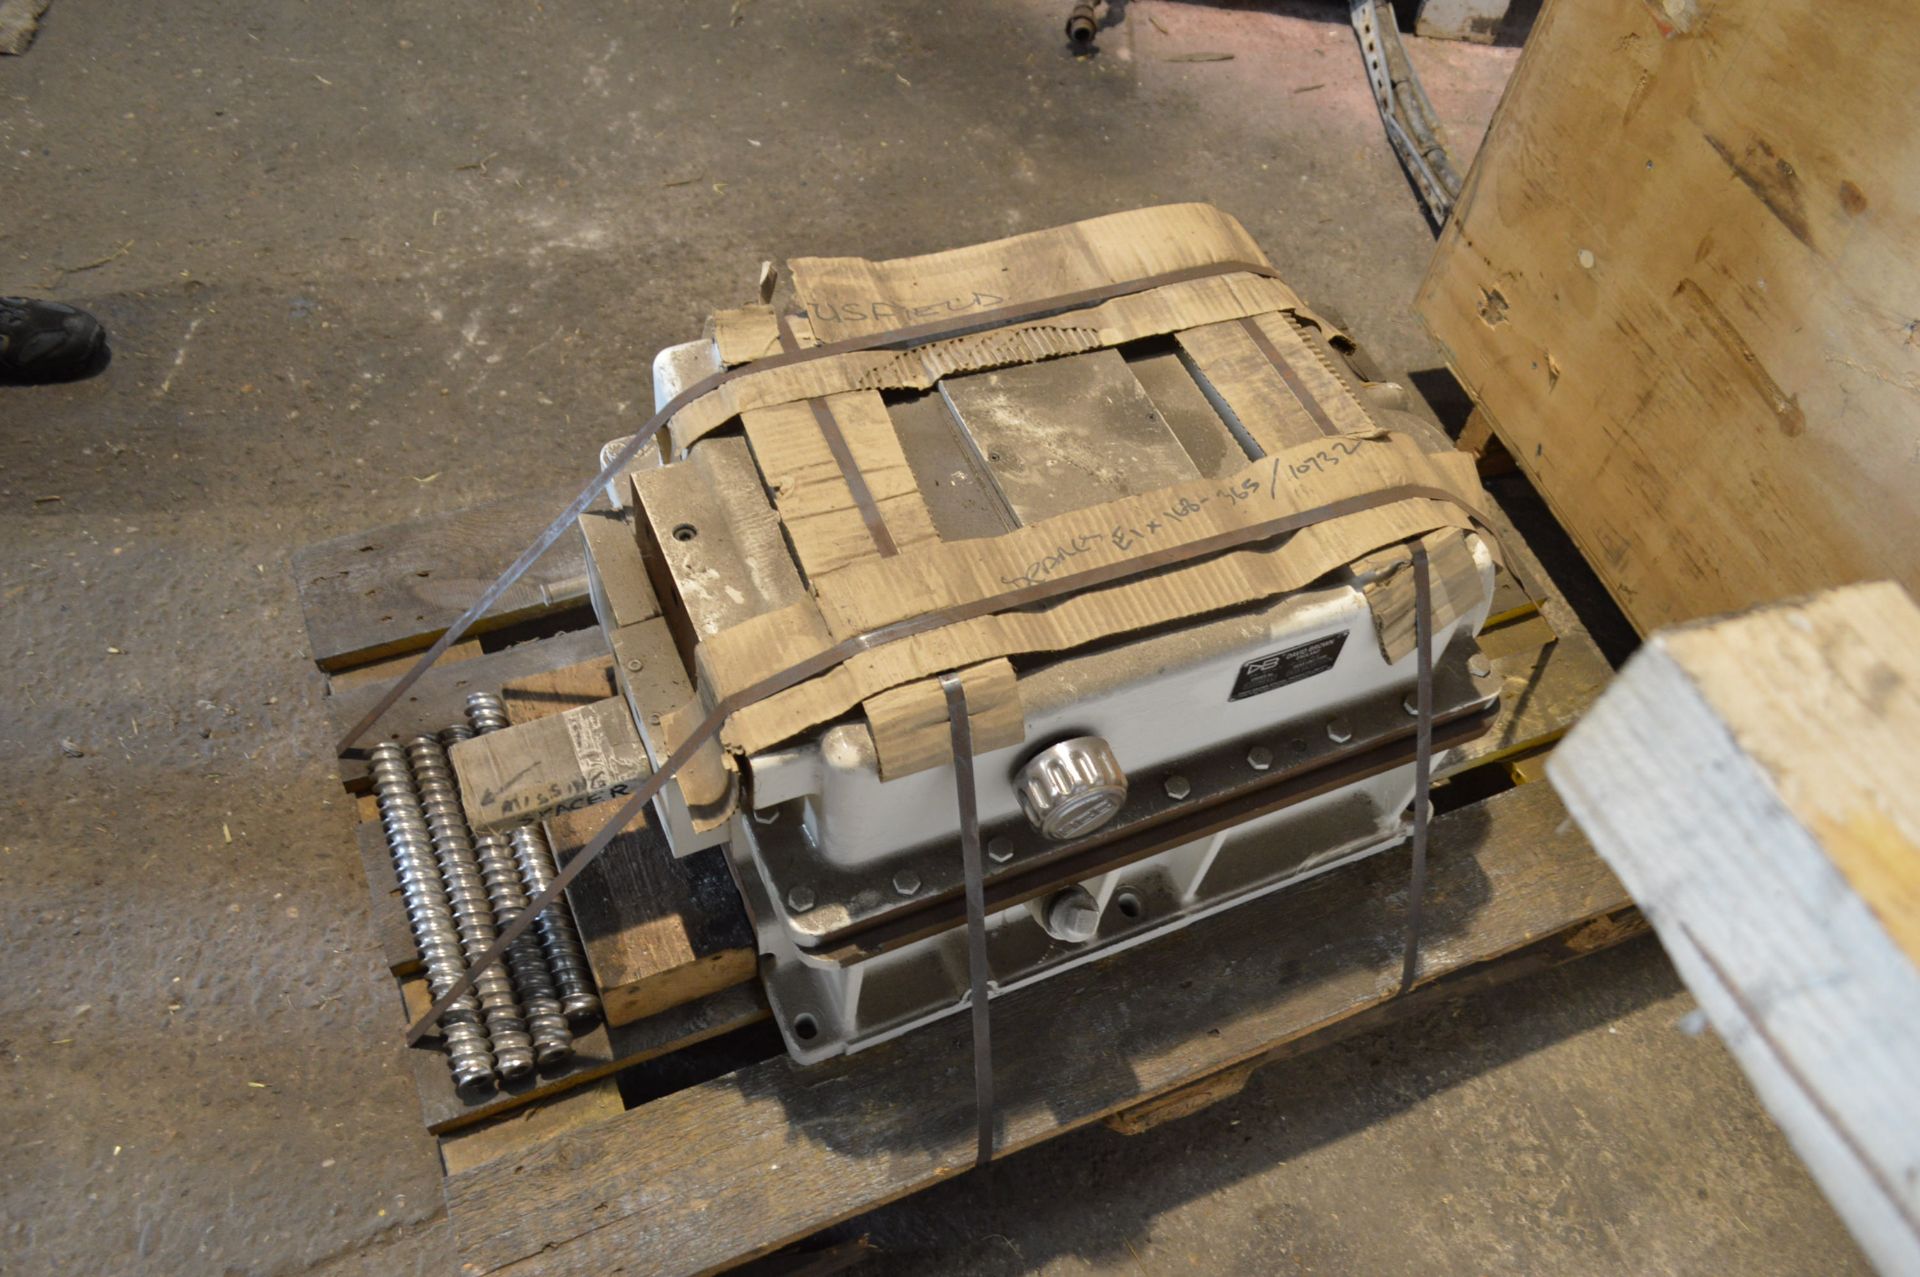 David Brown MPF65 MK4 Gearbox, understood to have been rebuilt, suitable for Baker Perkins MPF65 - Image 2 of 4